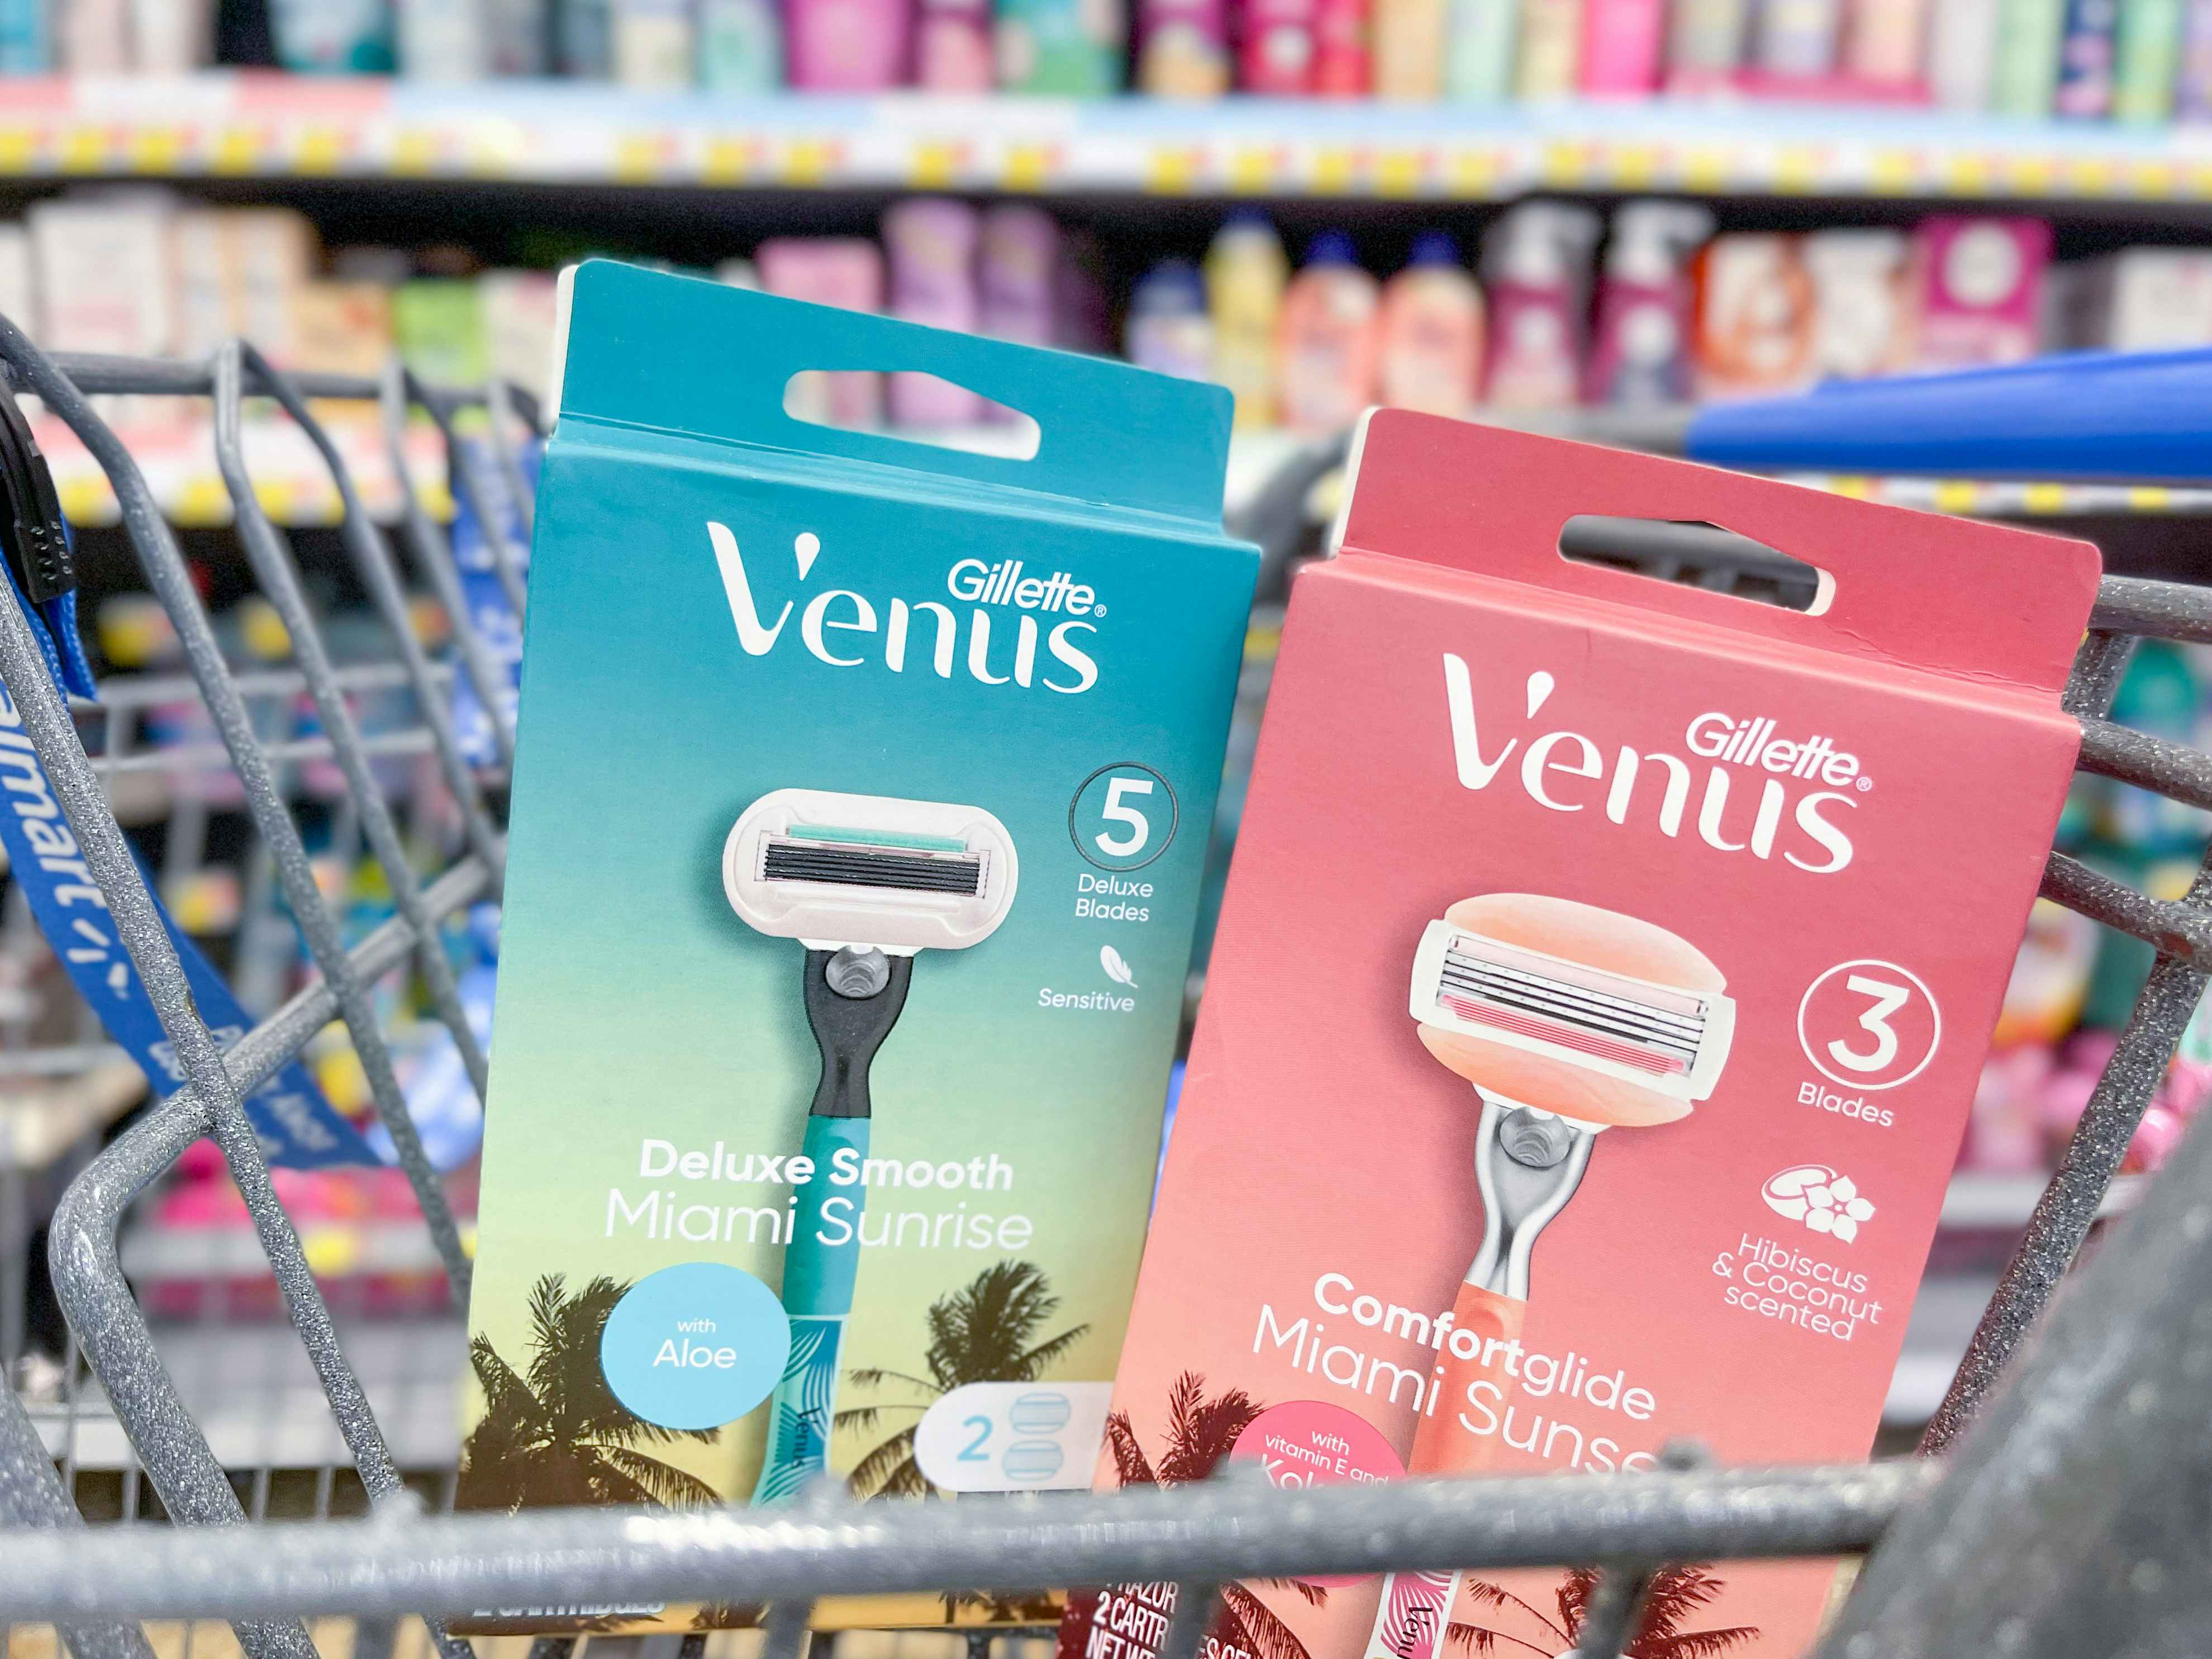 A box of Venus Miami Sunset and Venus Miami sunrise razors sitting in the front of a shopping cart.